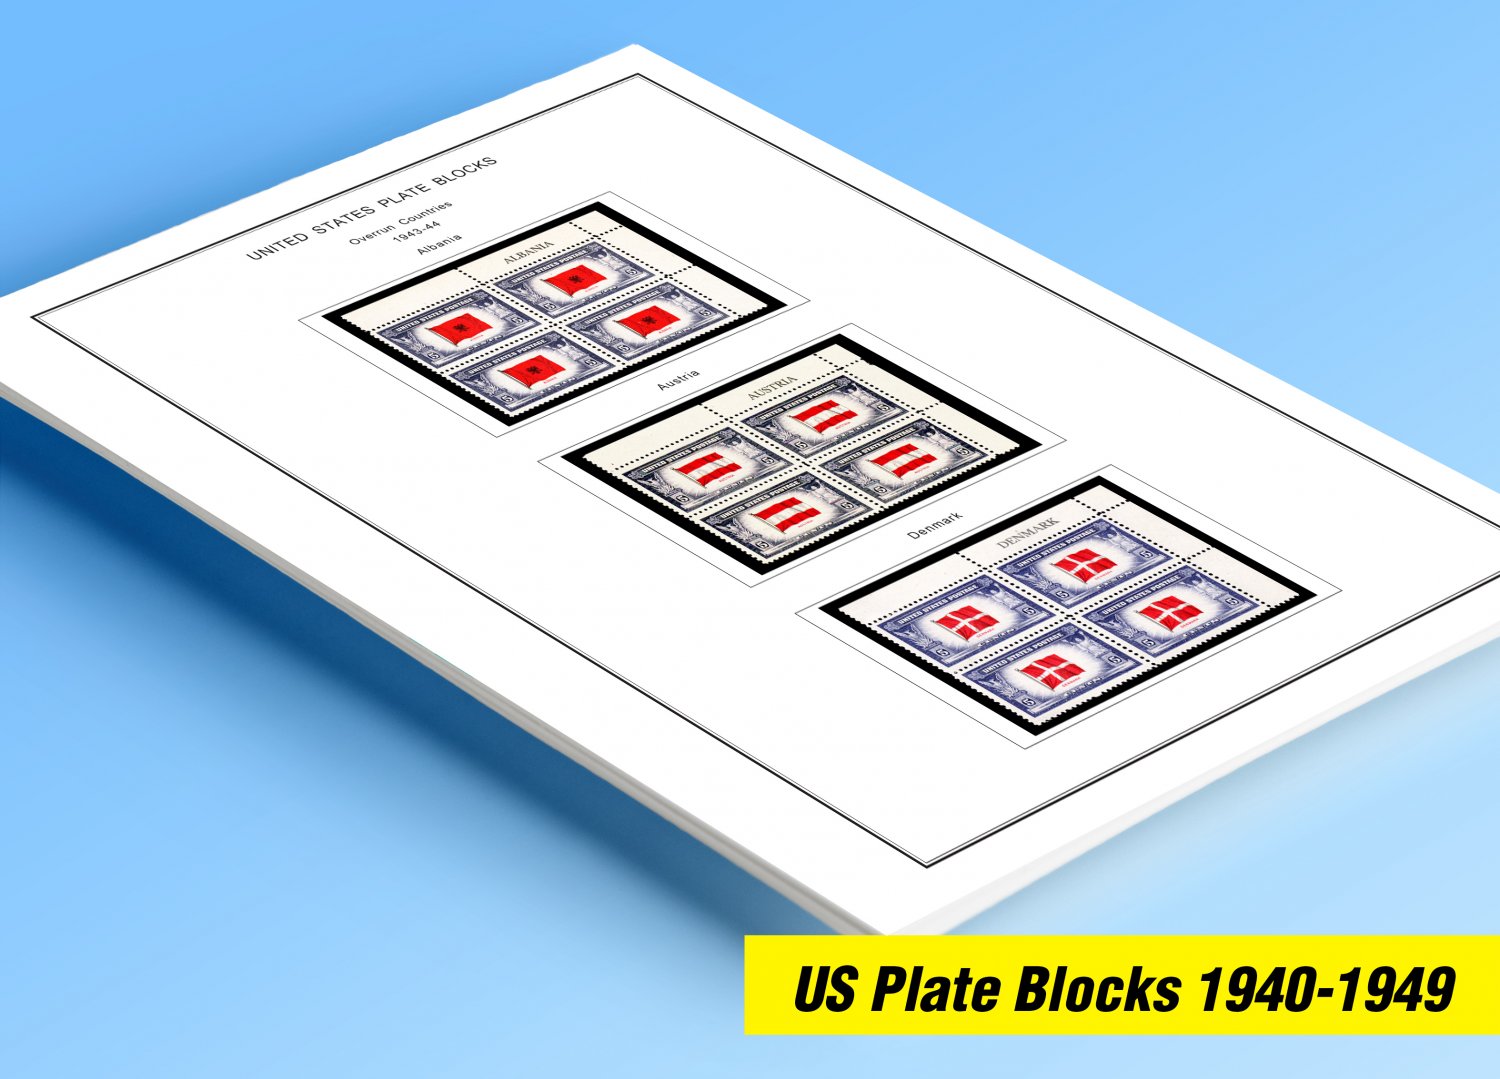 COLOR PRINTED US PLATE BLOCKS 1940-1949 STAMP ALBUM PAGES (45 illustrated pages)